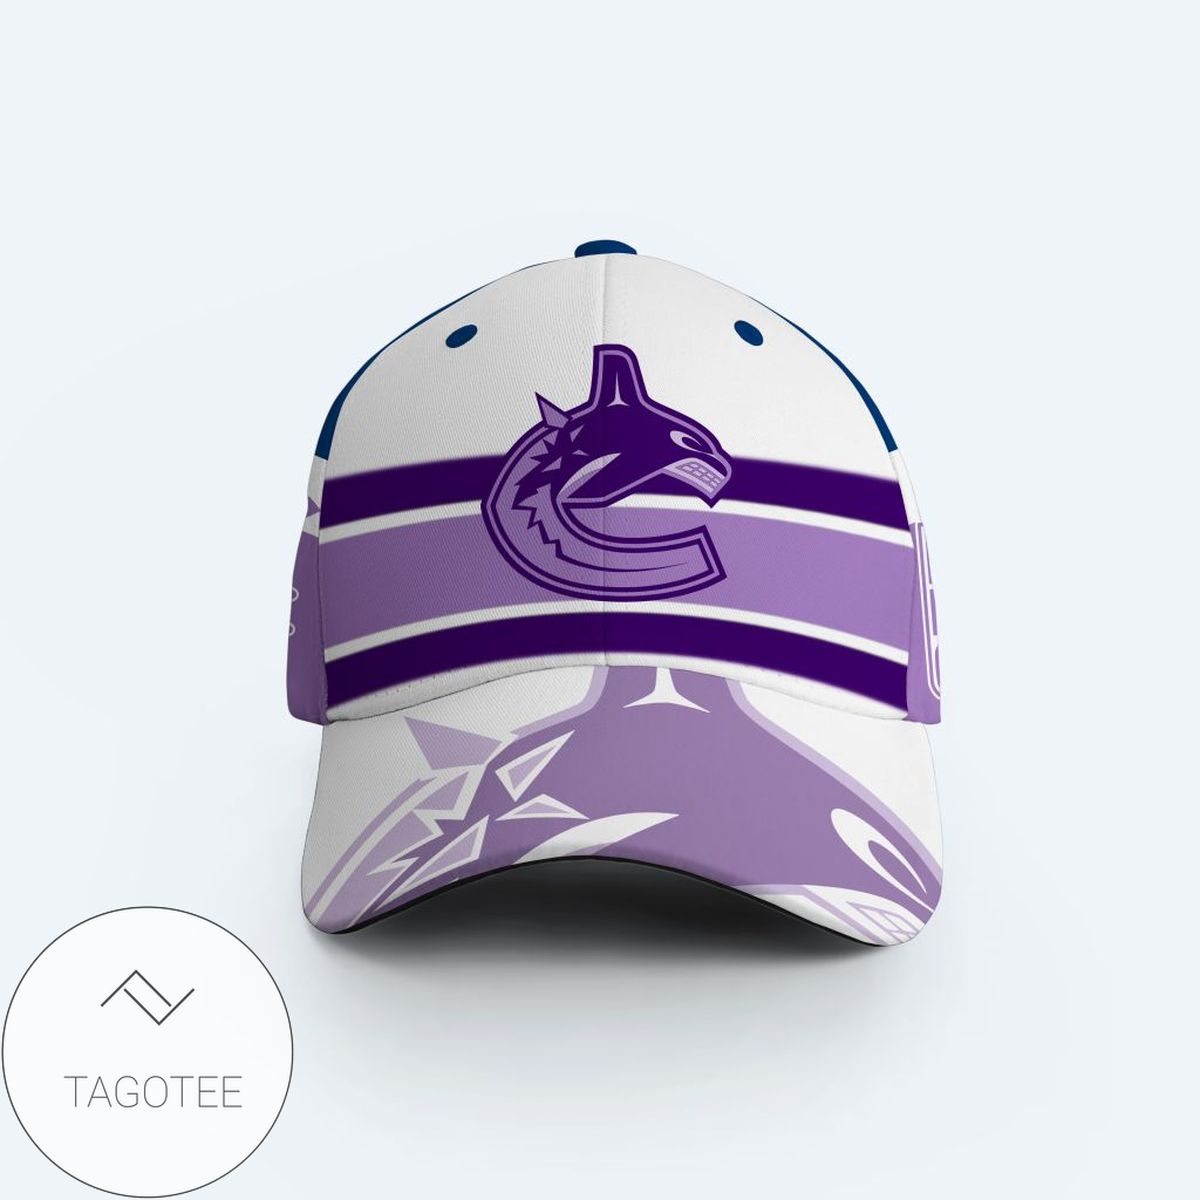 NHL Vancouver Canucks Fights Cancer Cap